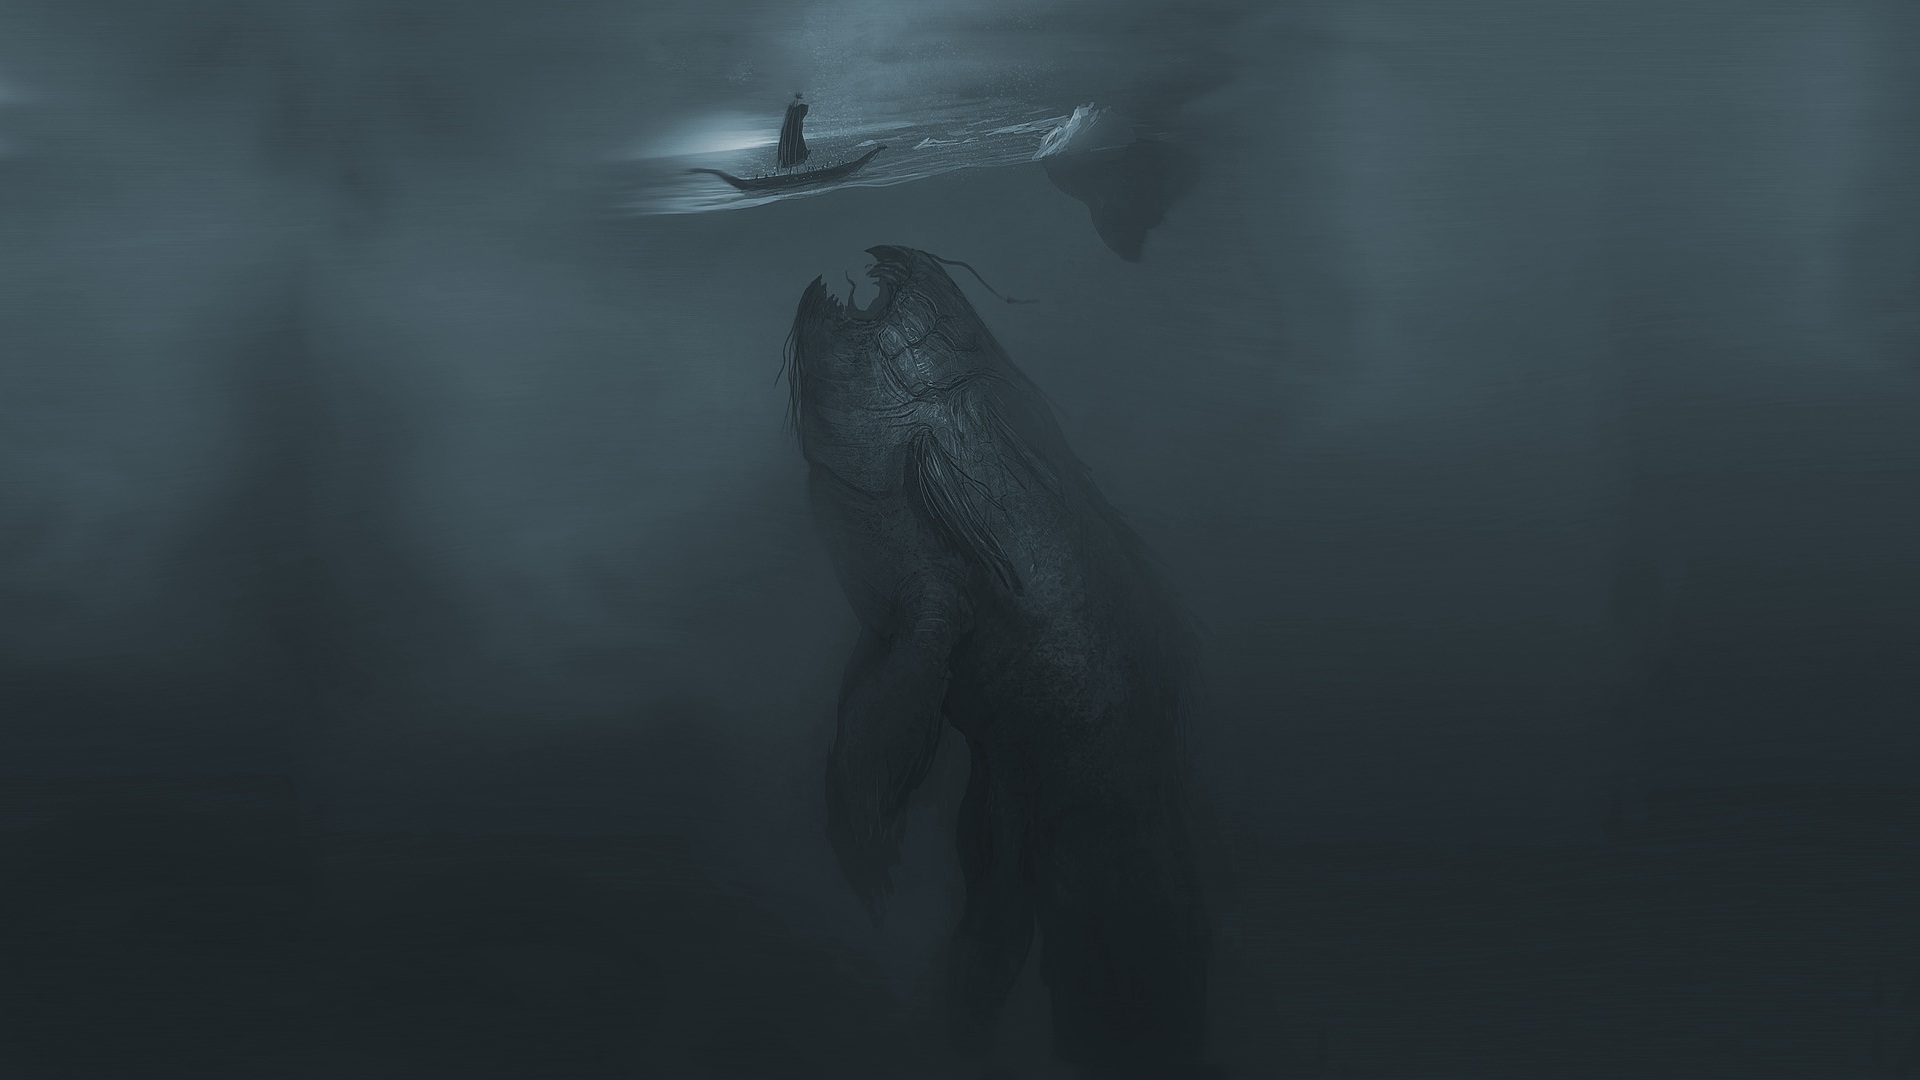 Whale and ship artwork by Layne Johnson: a captivating and ominous scene.